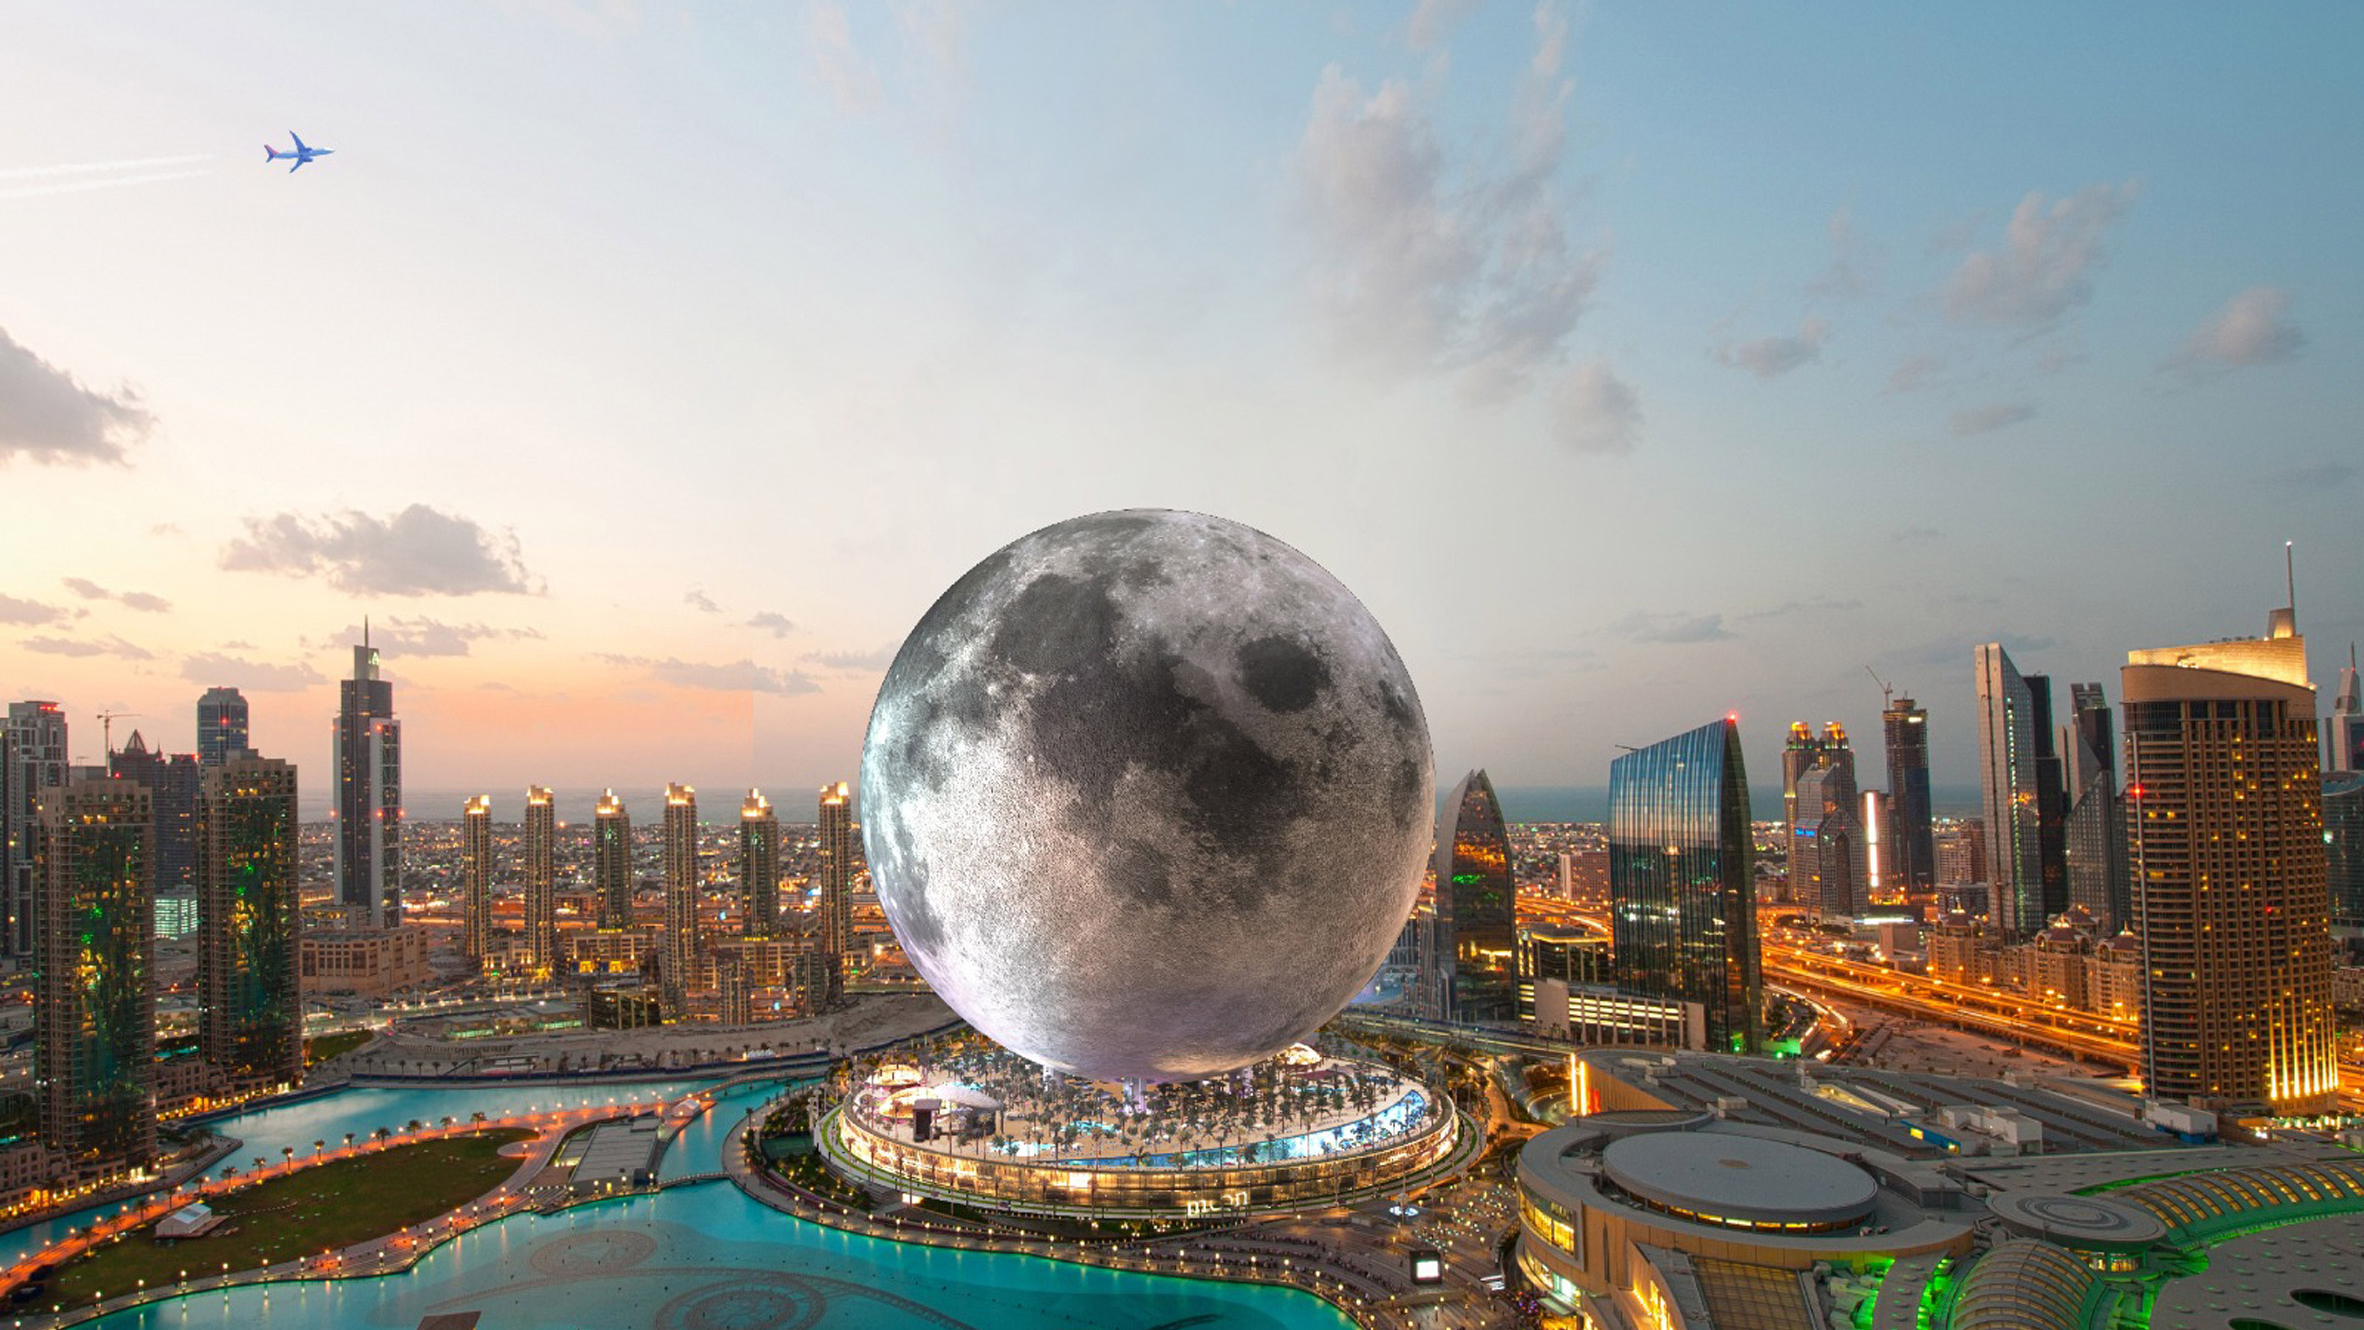 Moon-shaped resorts proposed to provide "space tourism for all"